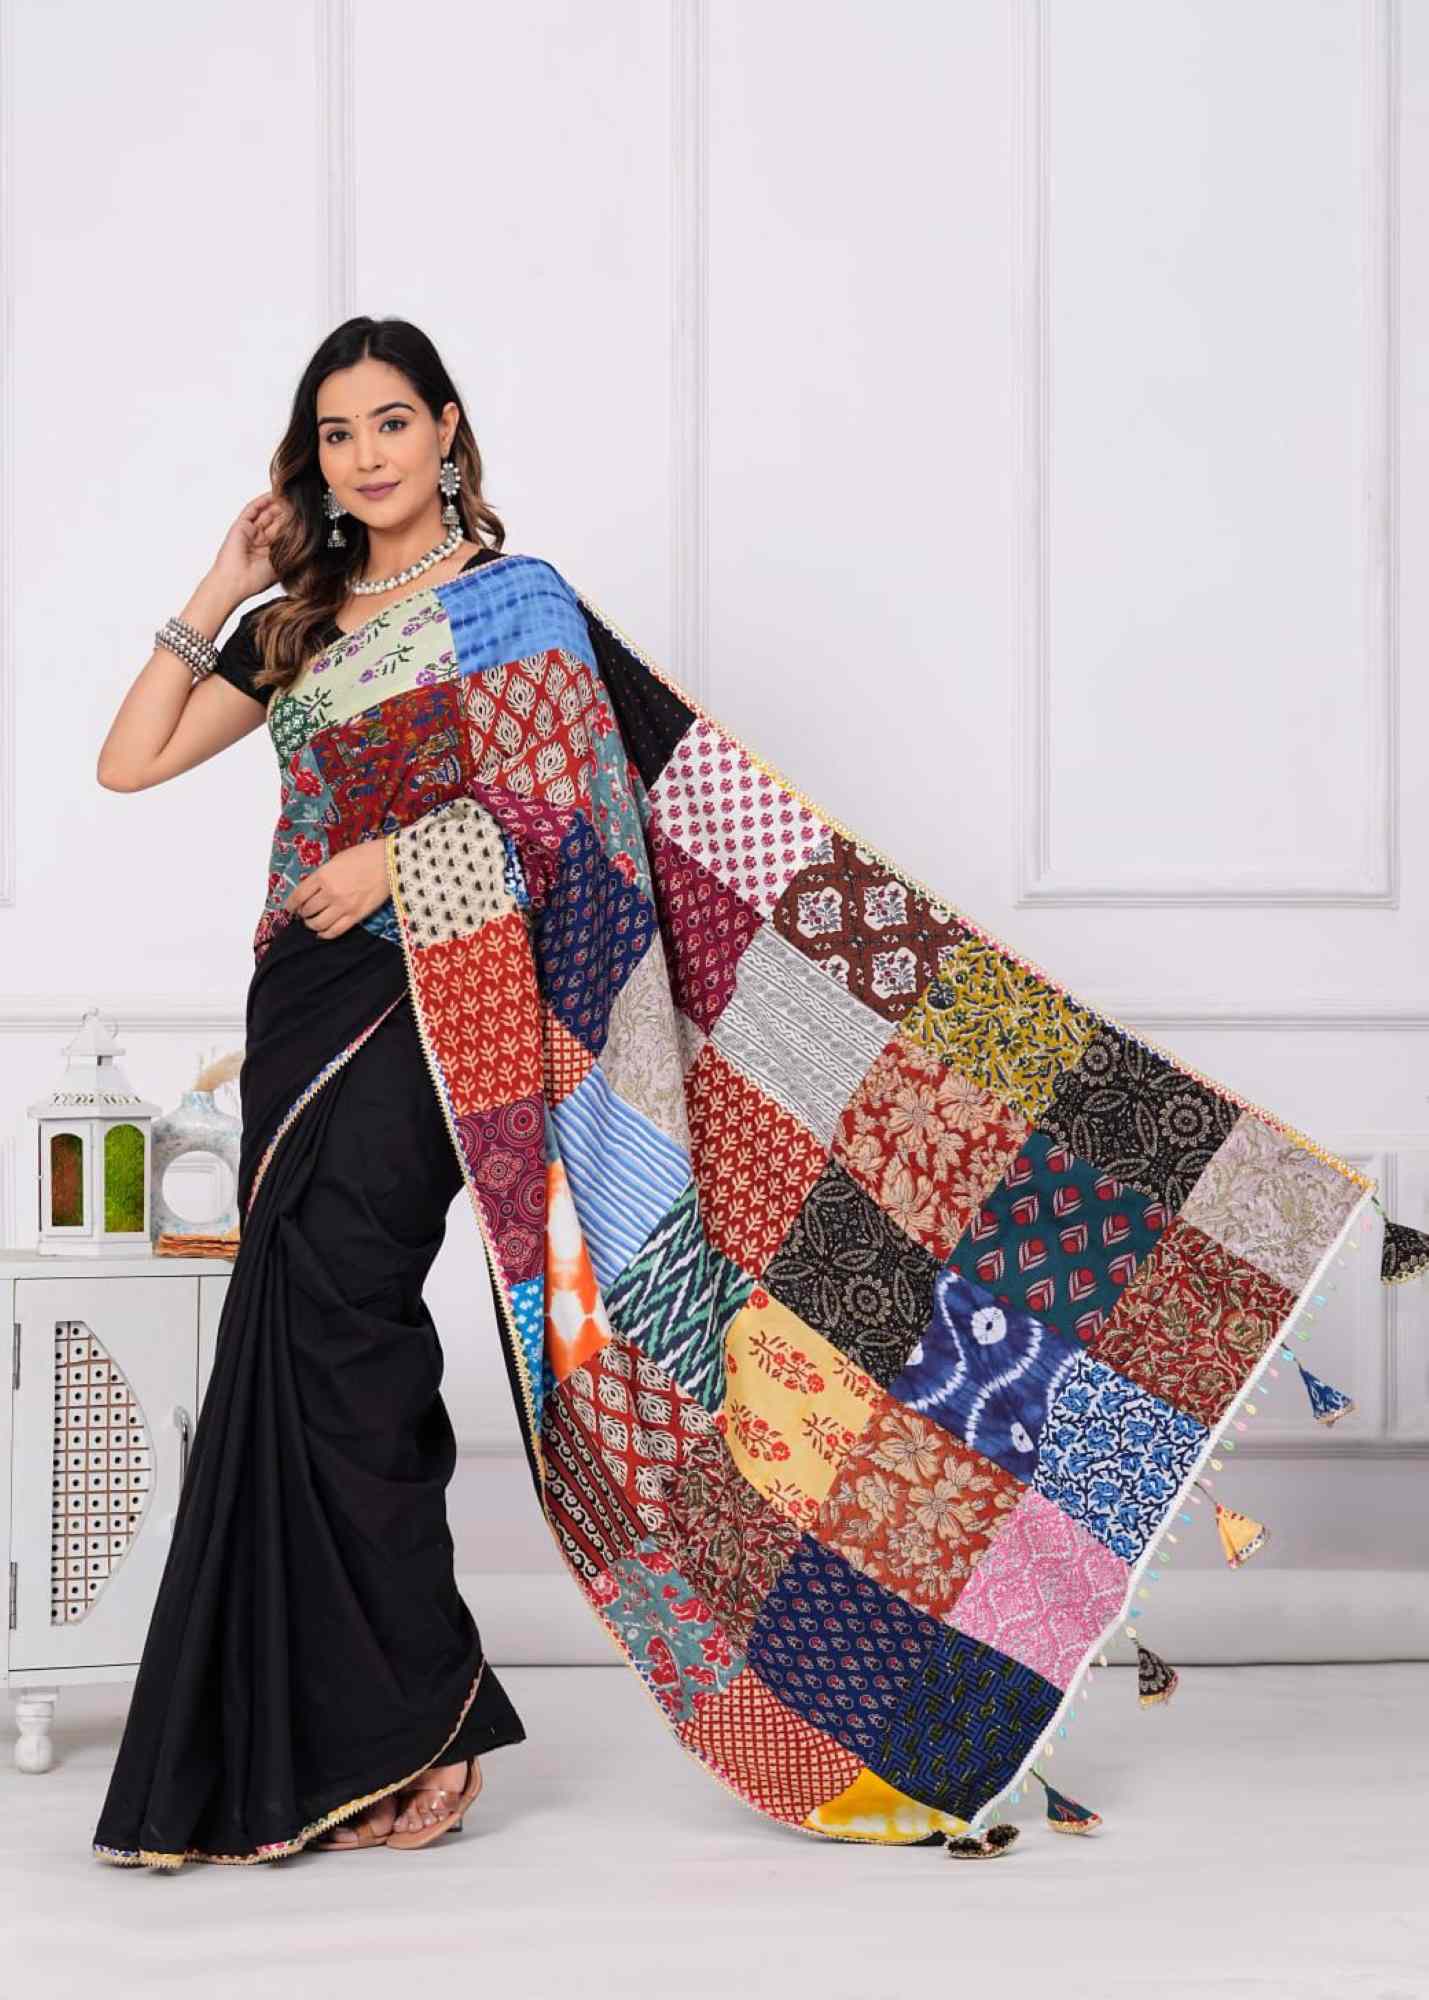 Designer Vibrant Patch Work Saree With Styles Tassels on  Pallu  Pure Cotton Ready To Wear Saree